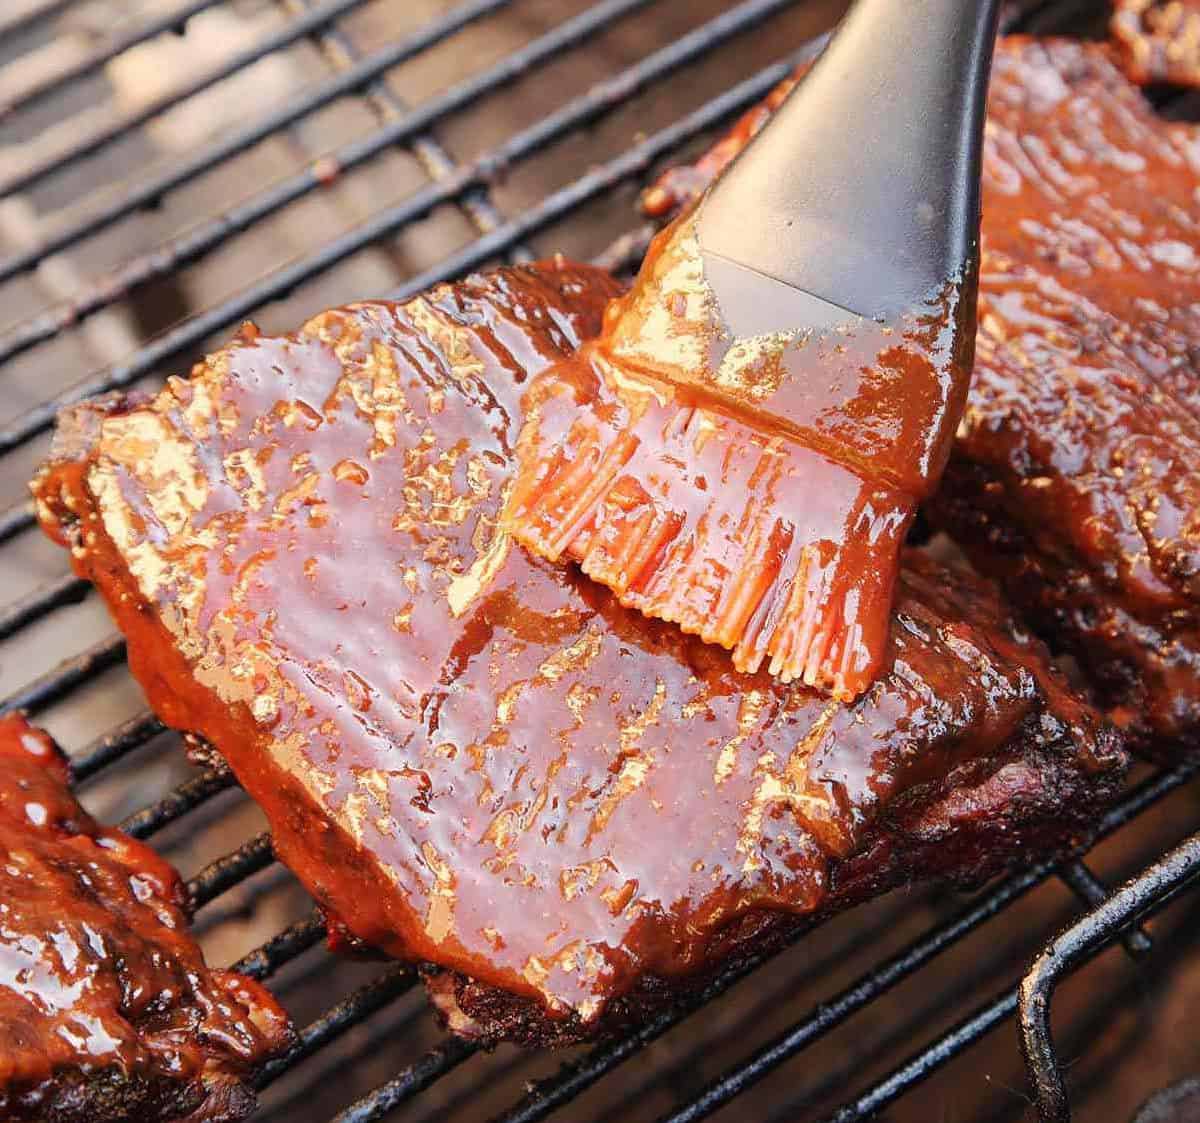  Get your hands dirty with these finger-lickin' good riblets